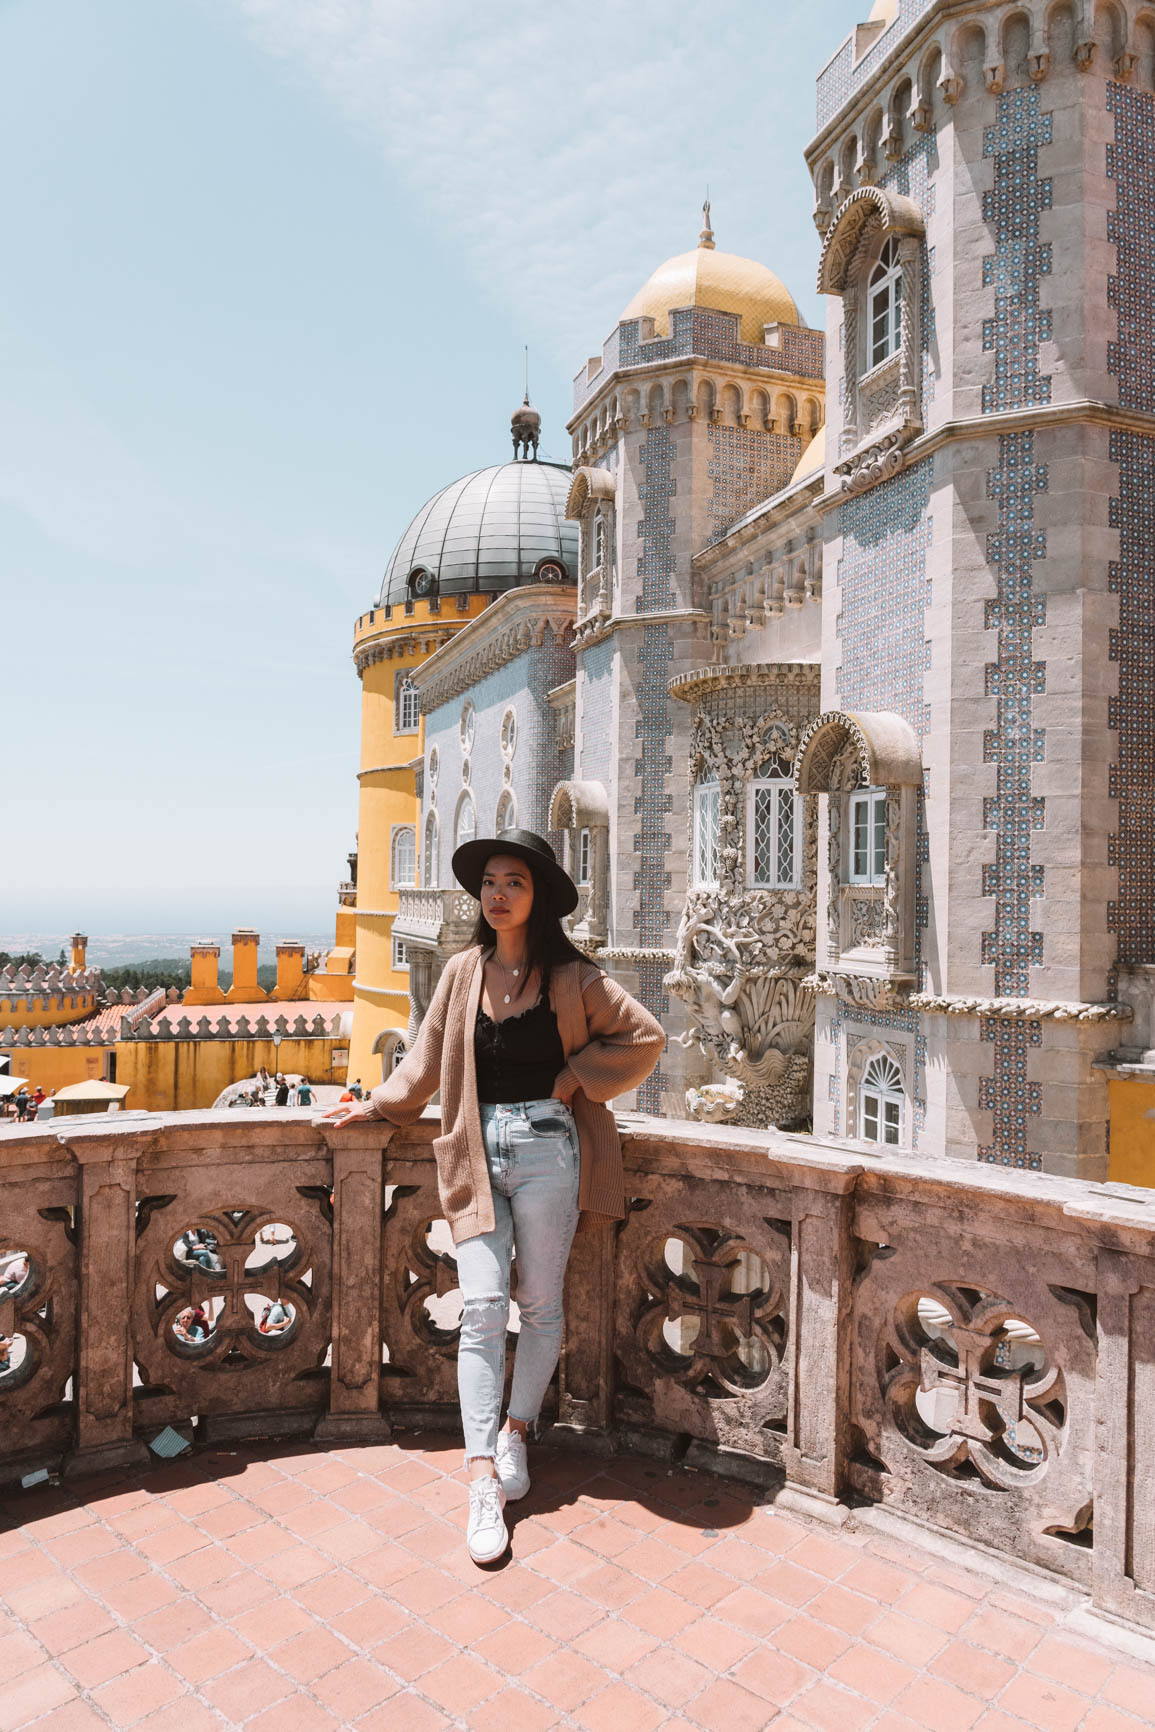 Palacio da Pena - Ultimate Guide to Visiting Sintra Portugal in a day trip from Lisbon Portugal  #Sintra #Lisbon #Portugal #Europe